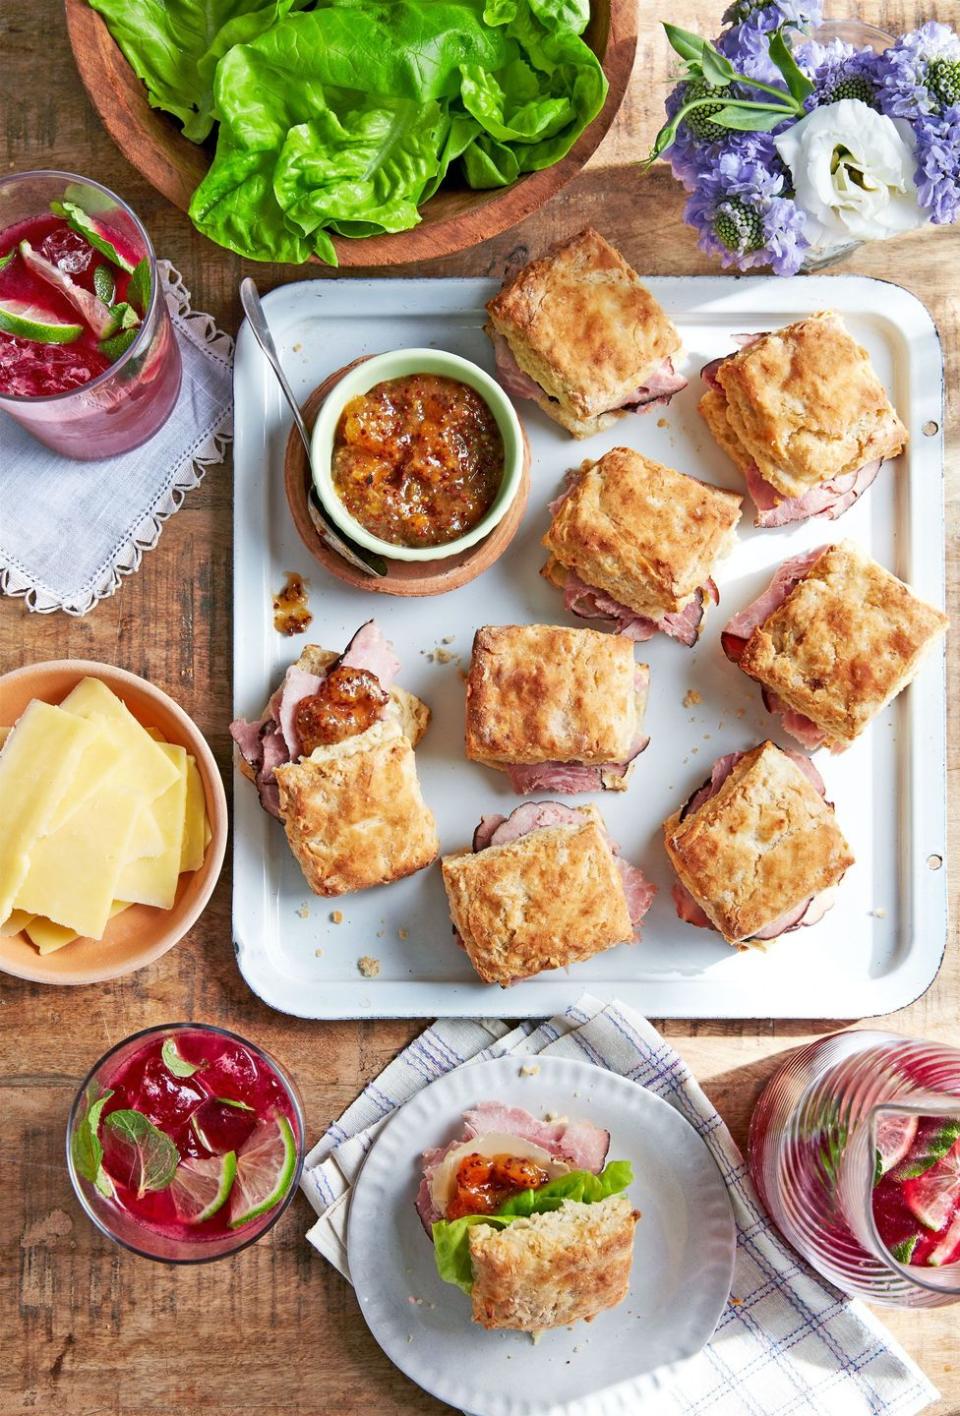 22) Ham Biscuit Sandwiches With Apricot Mustard